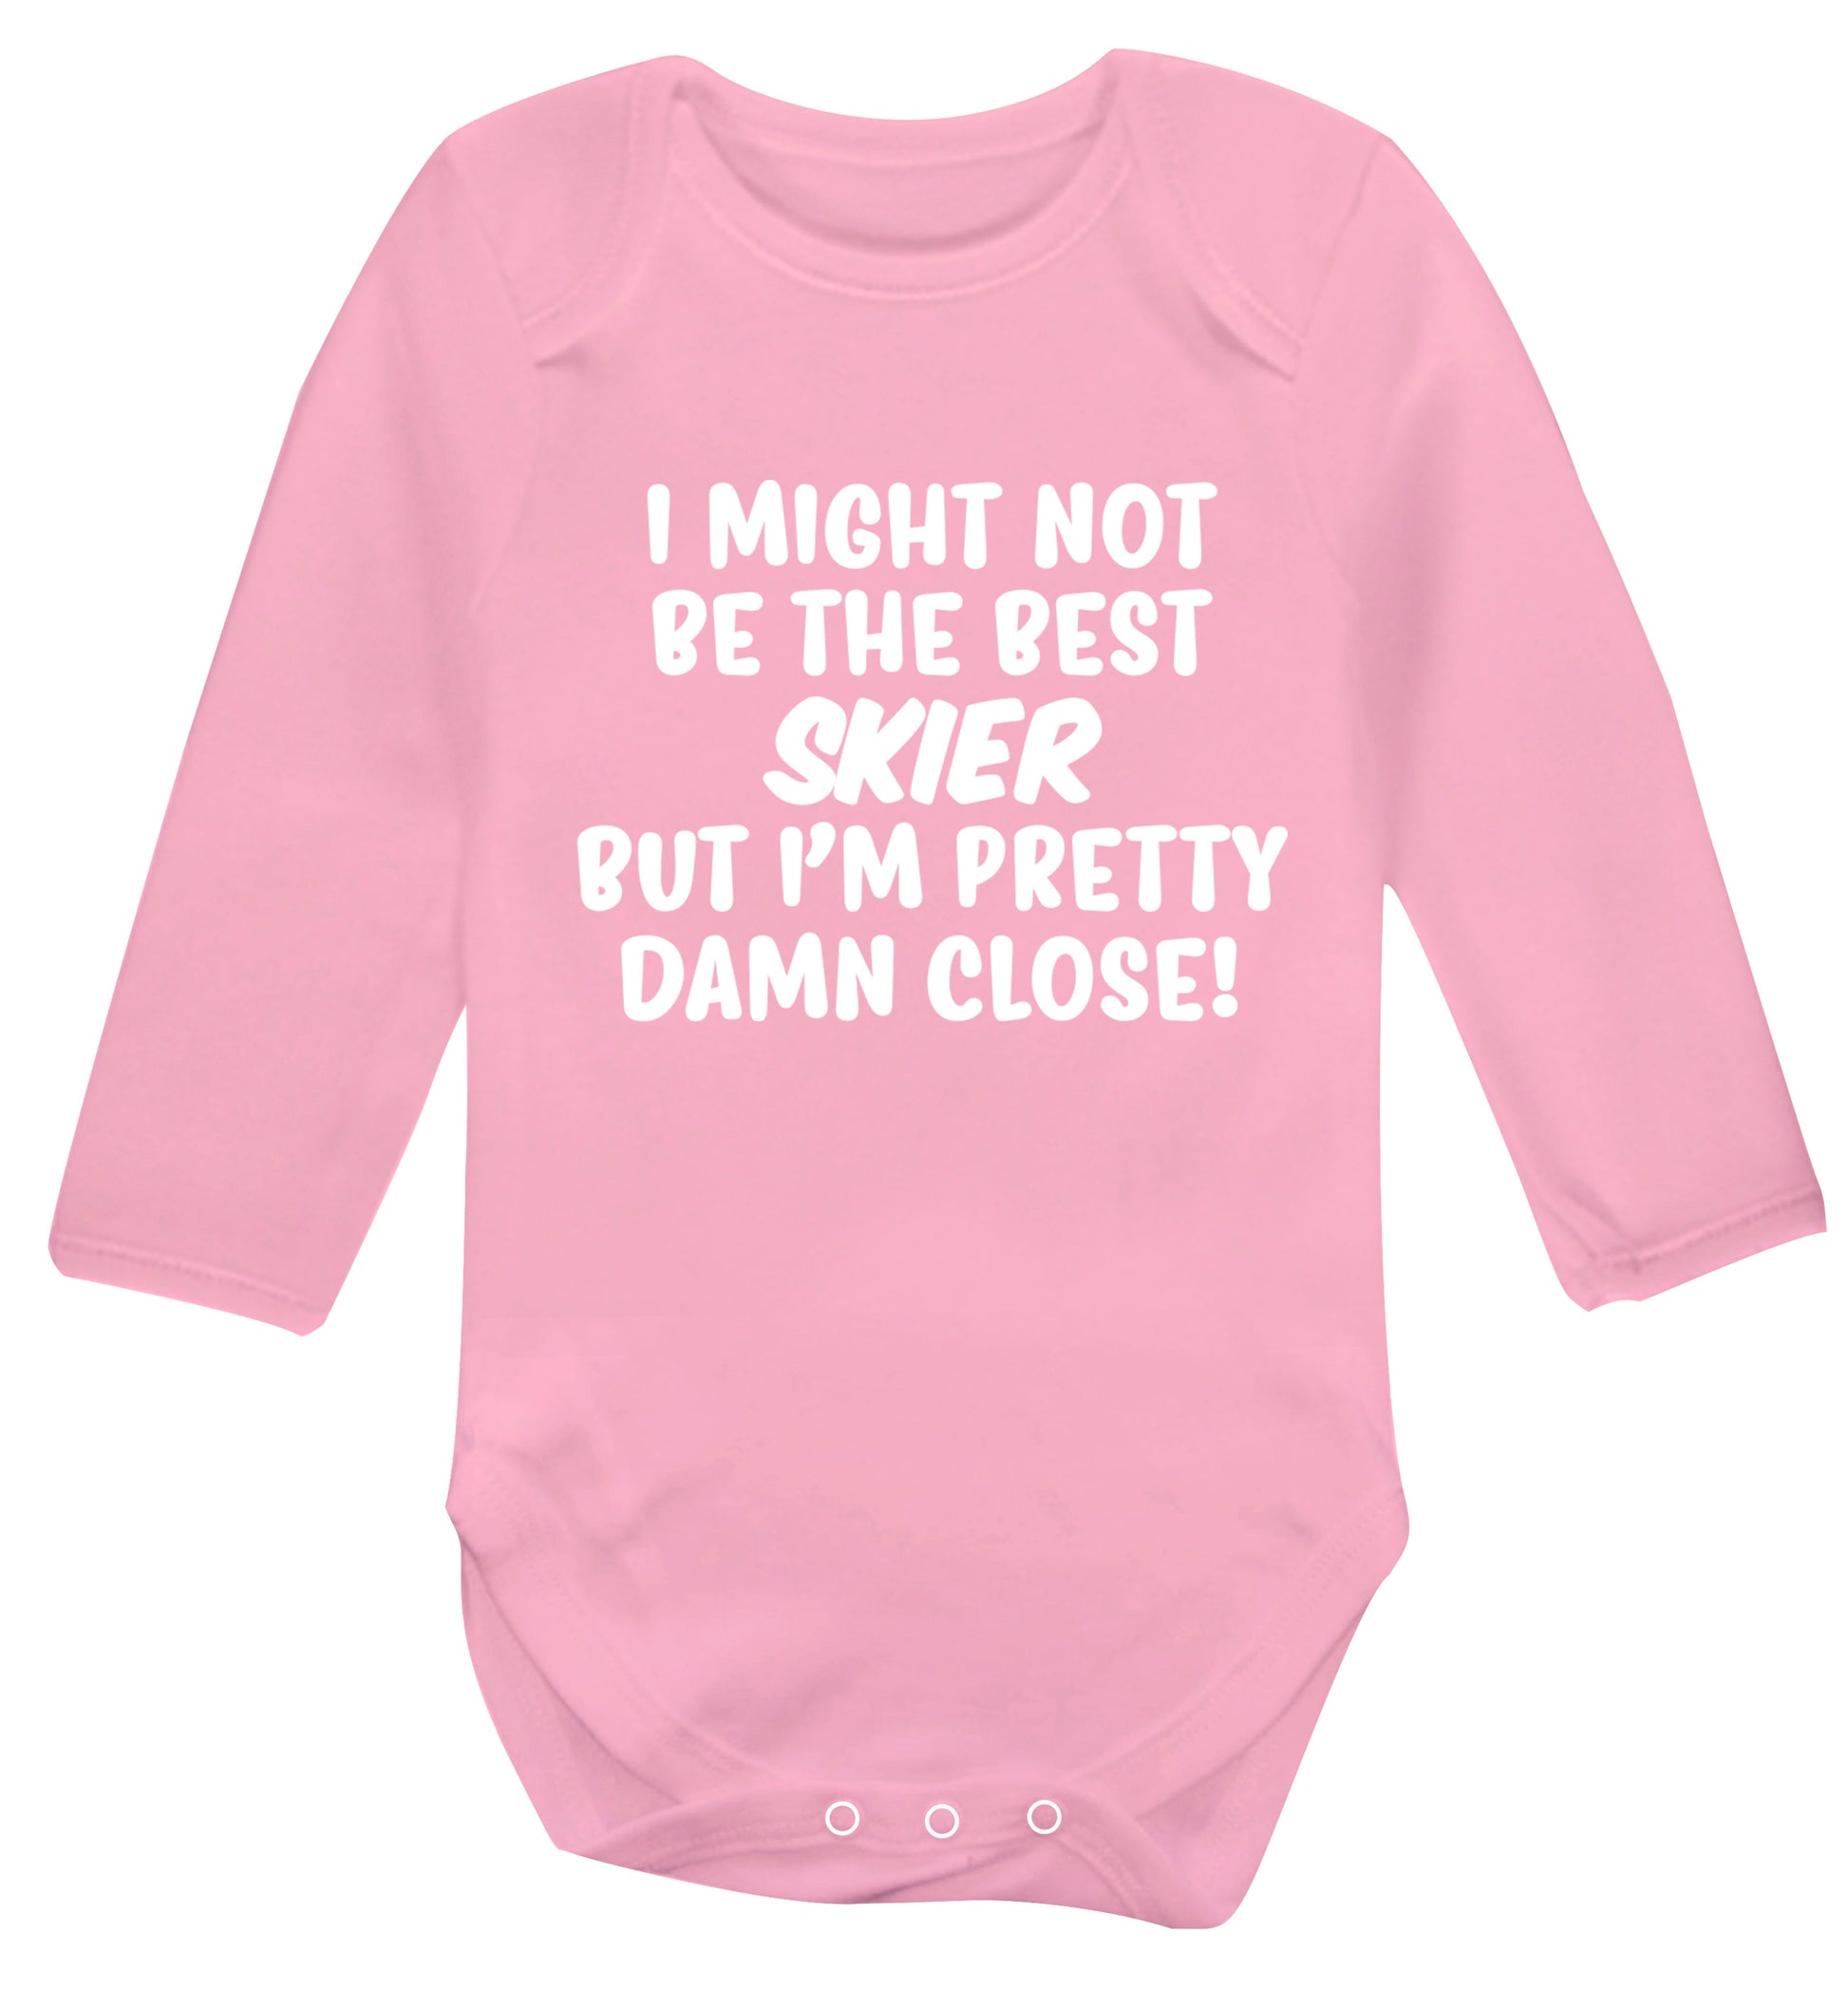 I might not be the best skier but I'm pretty damn close! Baby Vest long sleeved pale pink 6-12 months